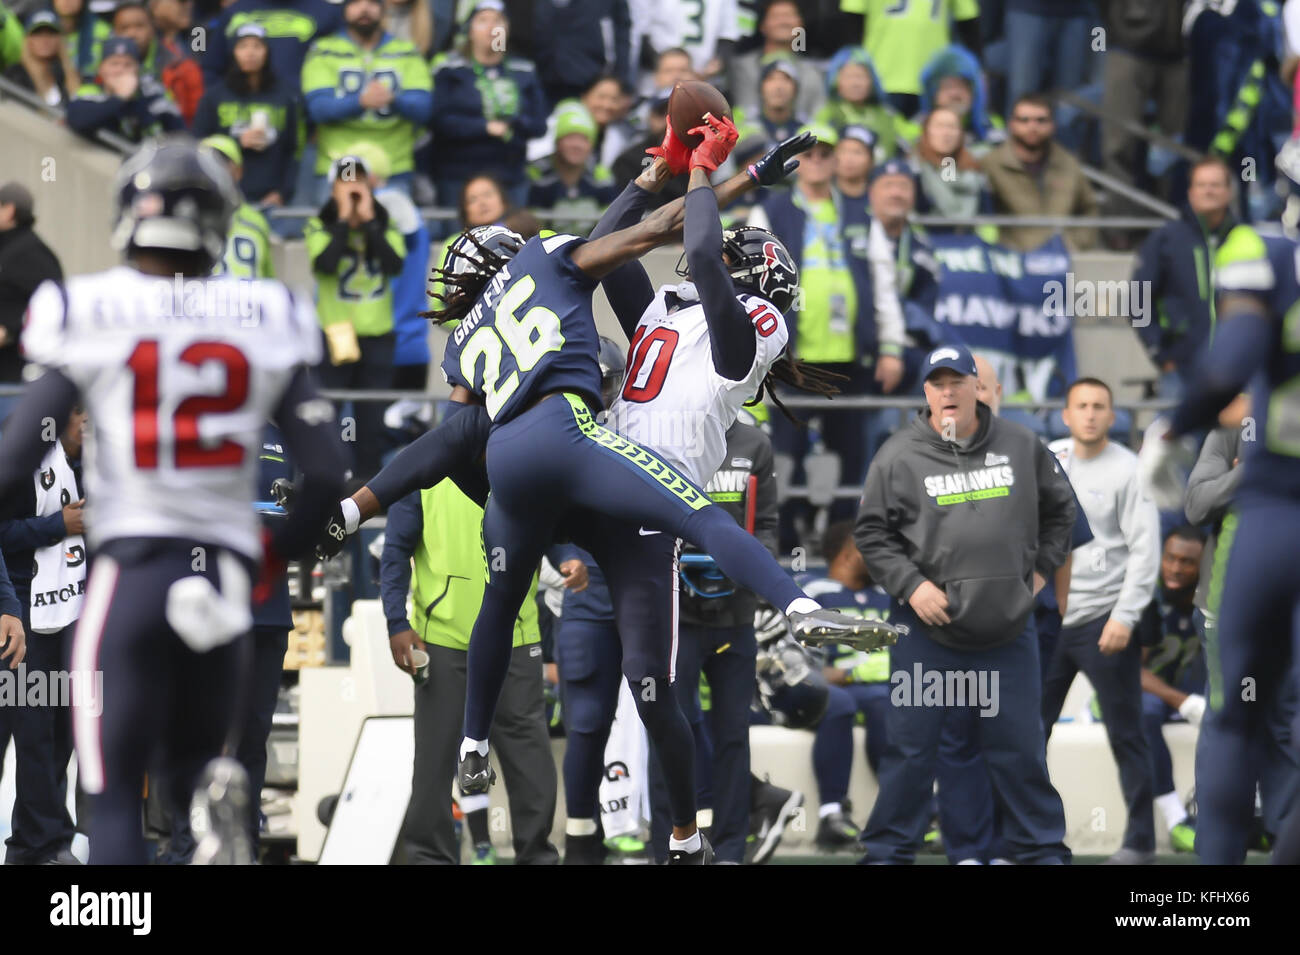 Seattle, Washington, USA. 29th Oct, 2017. Seattle's SHAQUILL GRIFFIN (26) and Houston's DeANDRE HOPKINS (10) go up for a pass that fell incomplete as the Houston Texans visit the Seattle Seahawks for an NFL game at Century Link Field in Seattle, WA. Credit: Jeff Halstead/ZUMA Wire/Alamy Live News Stock Photo